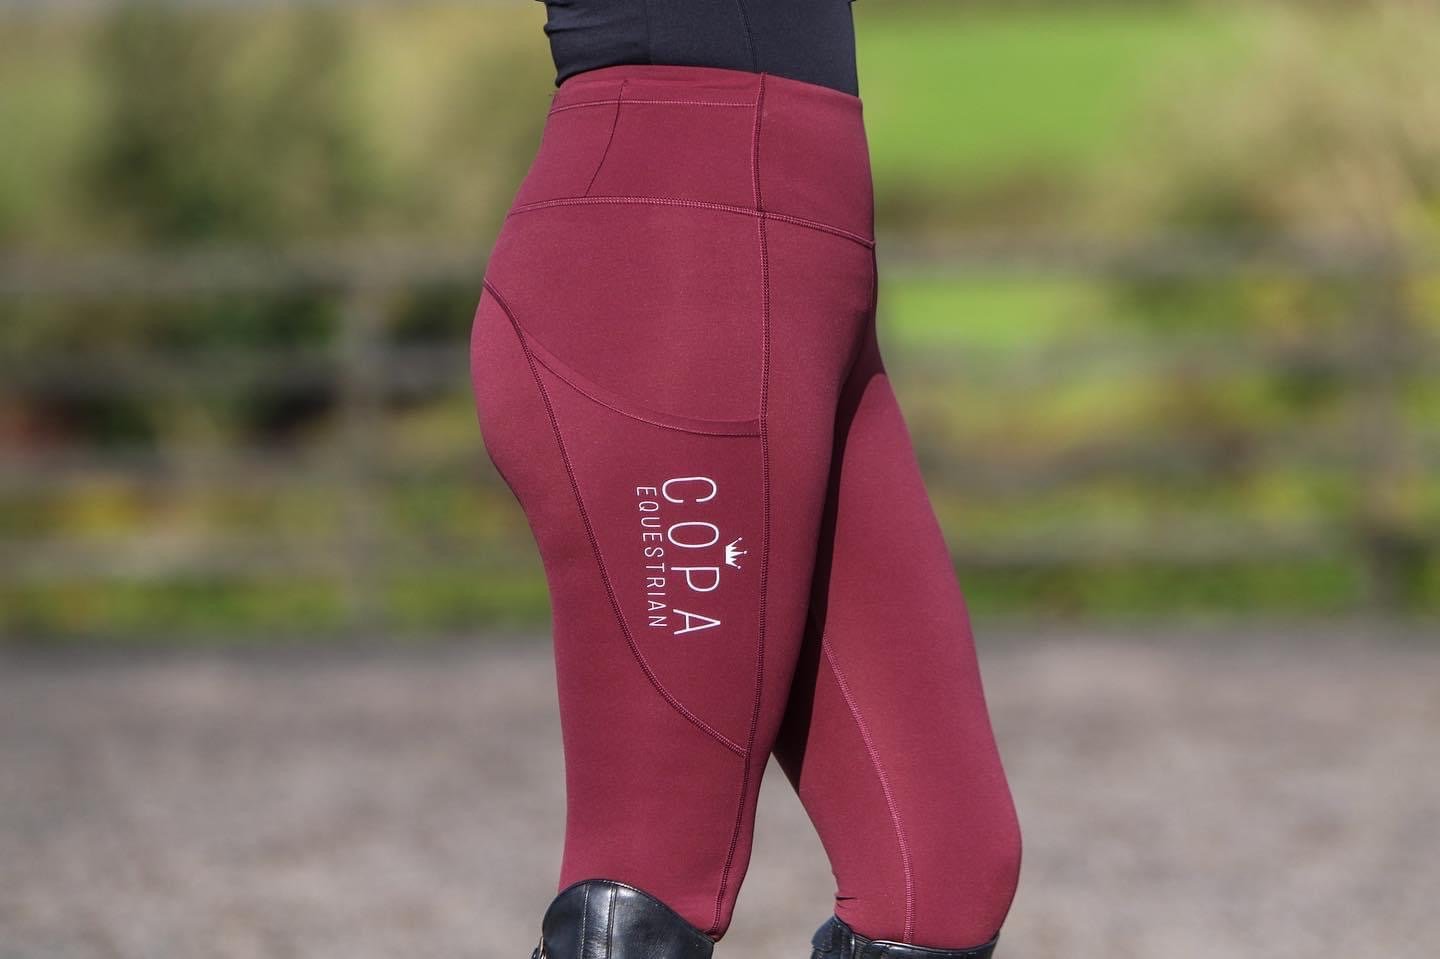 Harry Hall Bala Horse Riding Leggings for Women - Ladies Equestrian Tights  with Silicone Knee & Phone Pockets - Soft Stretchy Fabric - Stone, Size 24  : Amazon.co.uk: Fashion